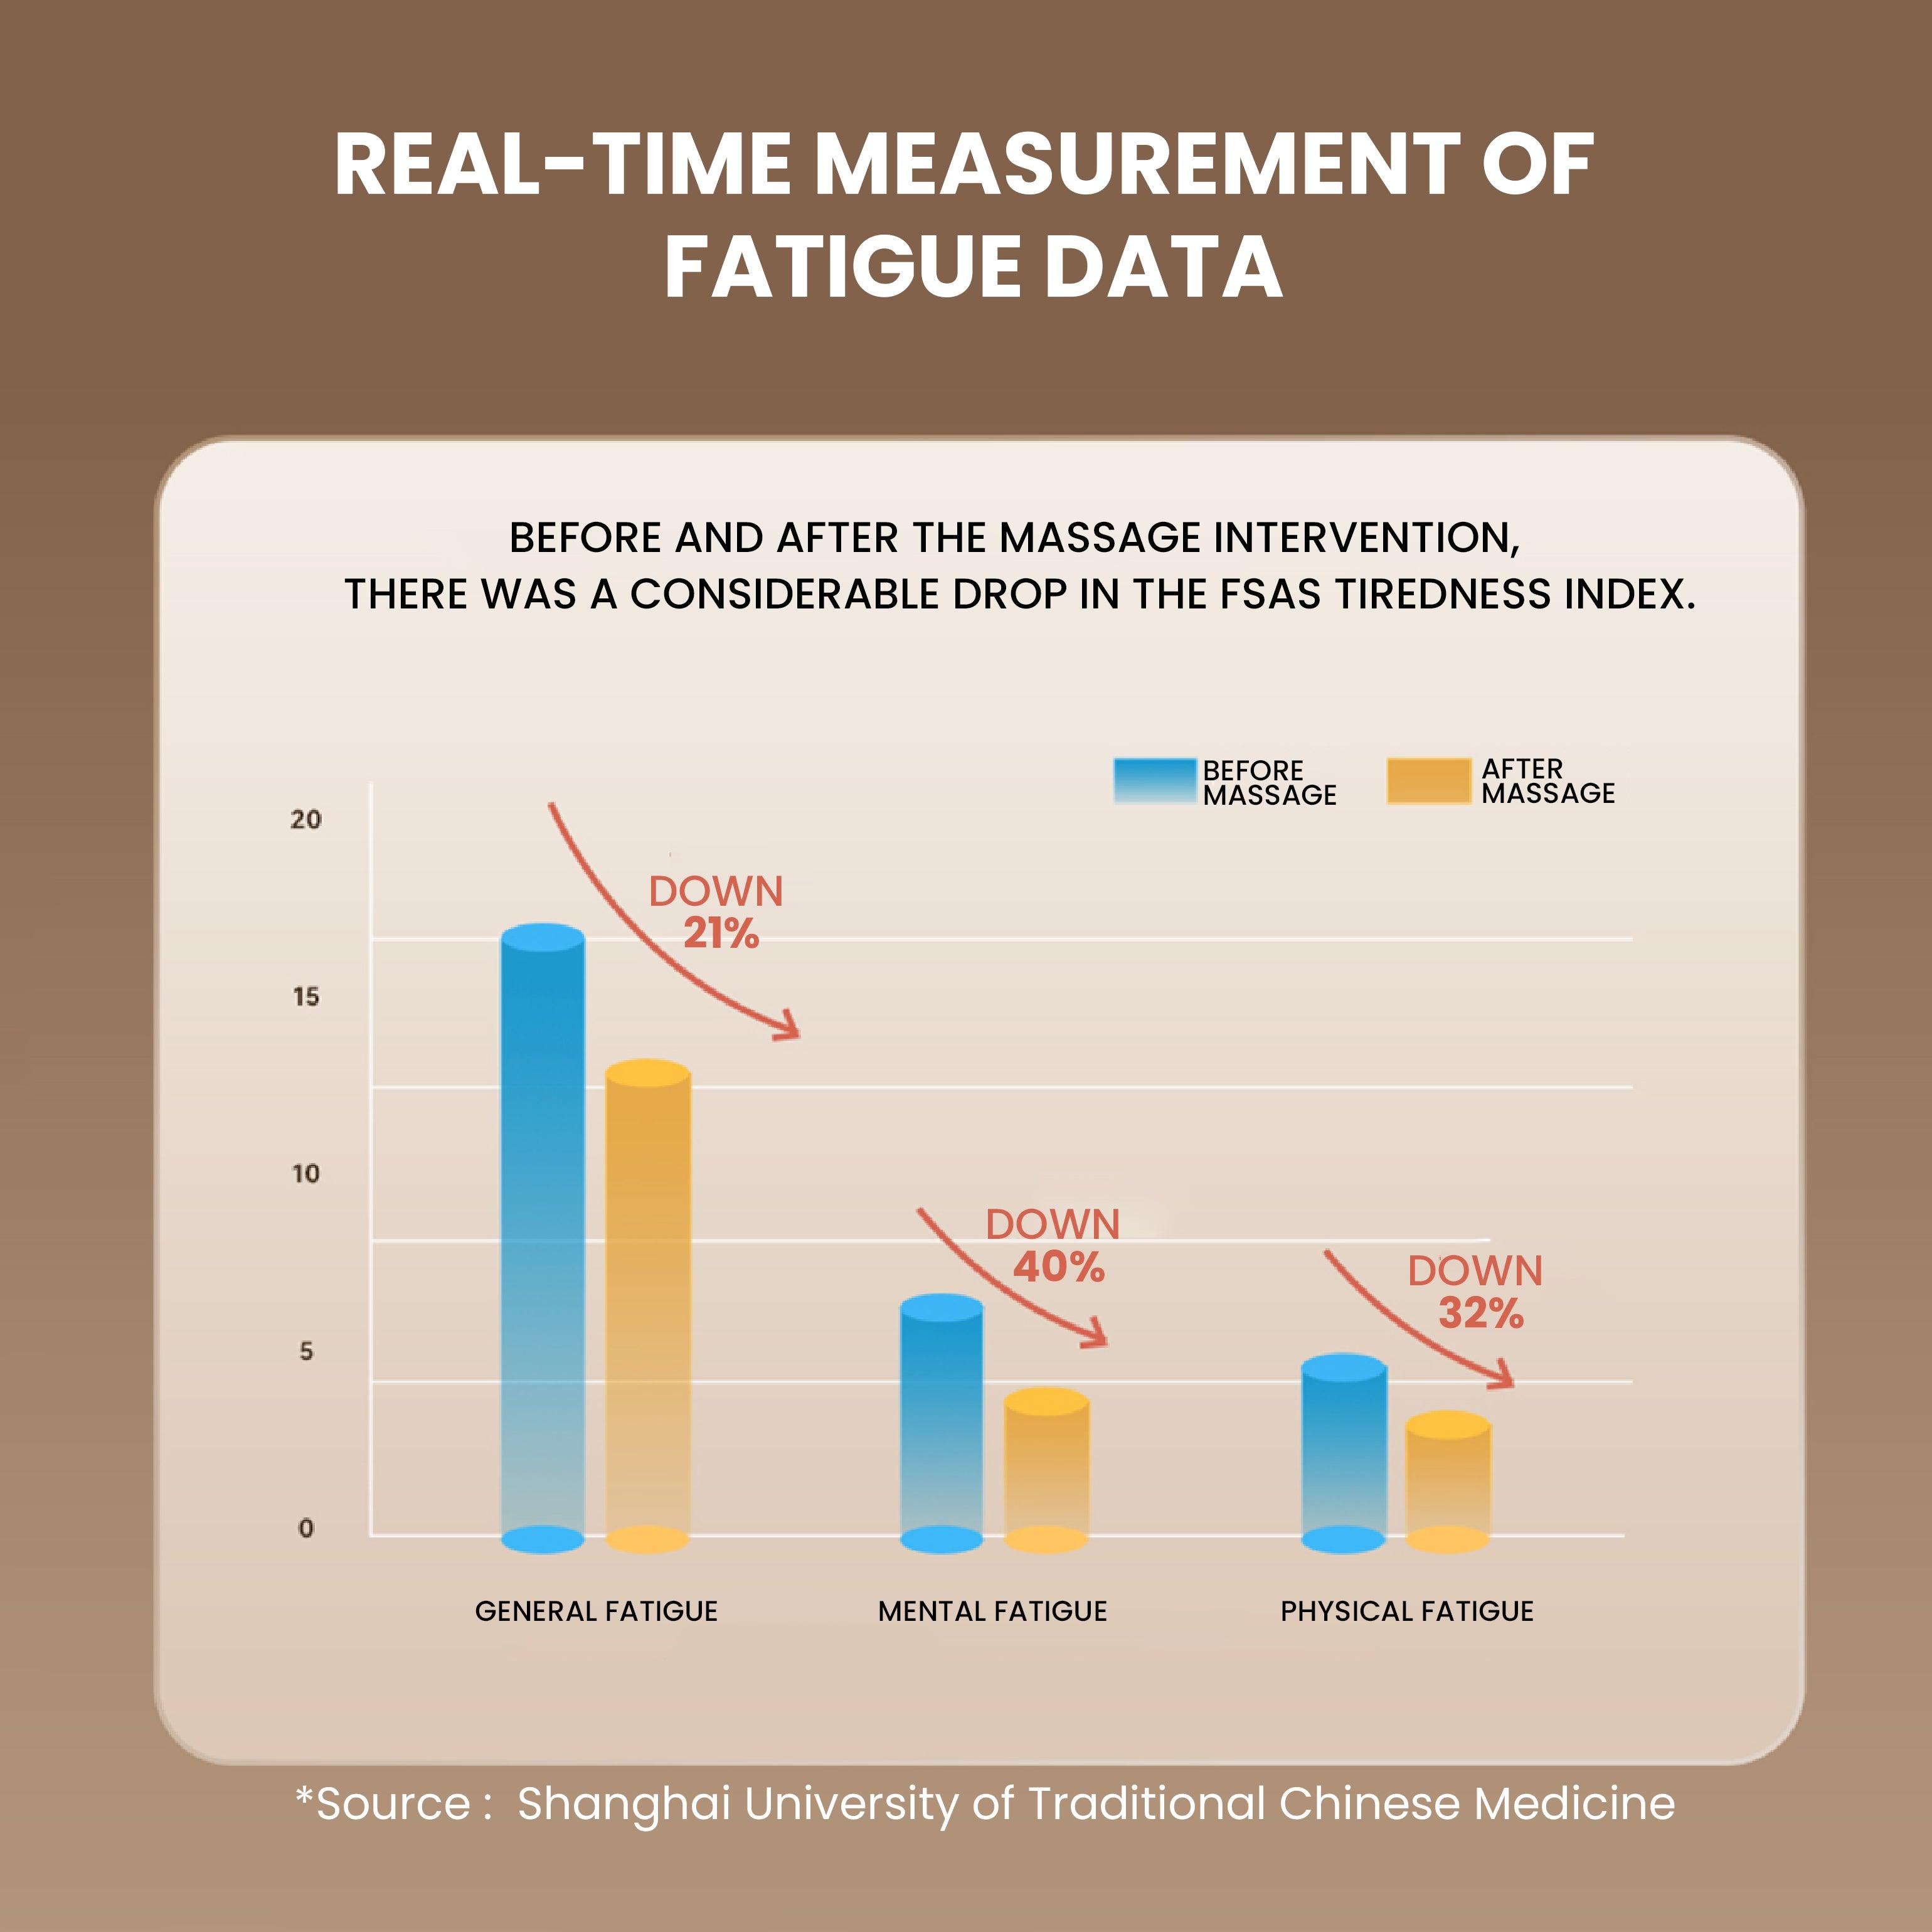 Chart showing real-time measurement of fatigue data with a documented drop in general, mental, and physical fatigue after massage intervention.